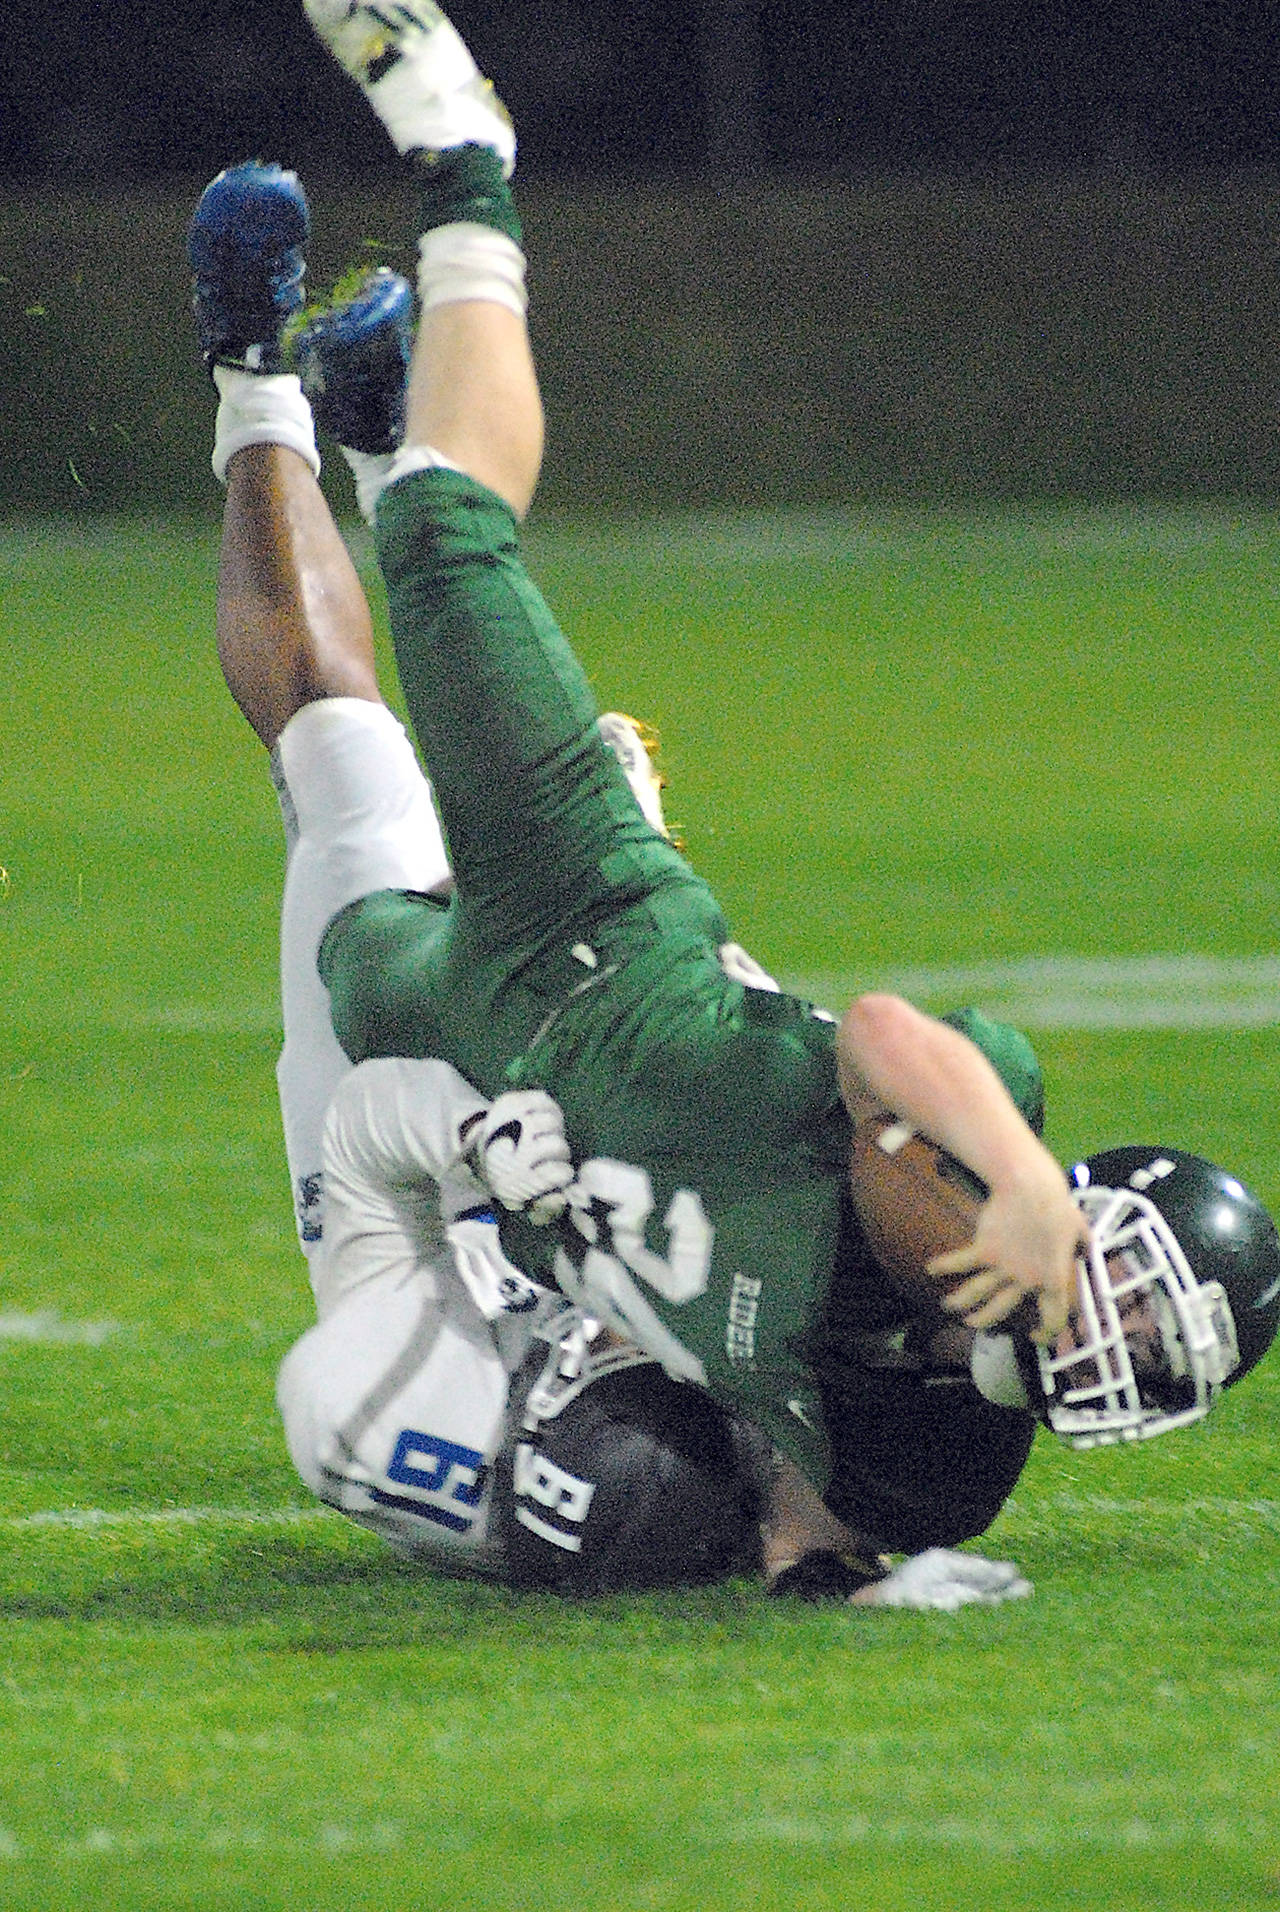 Keith Thorpe/Peninsula Daily News Port Angele’s Trevor Shumway, front, is upended by Olympic’s Jessie Brown during the first quarter of play on Friday night at Port Angeles Civic Field.